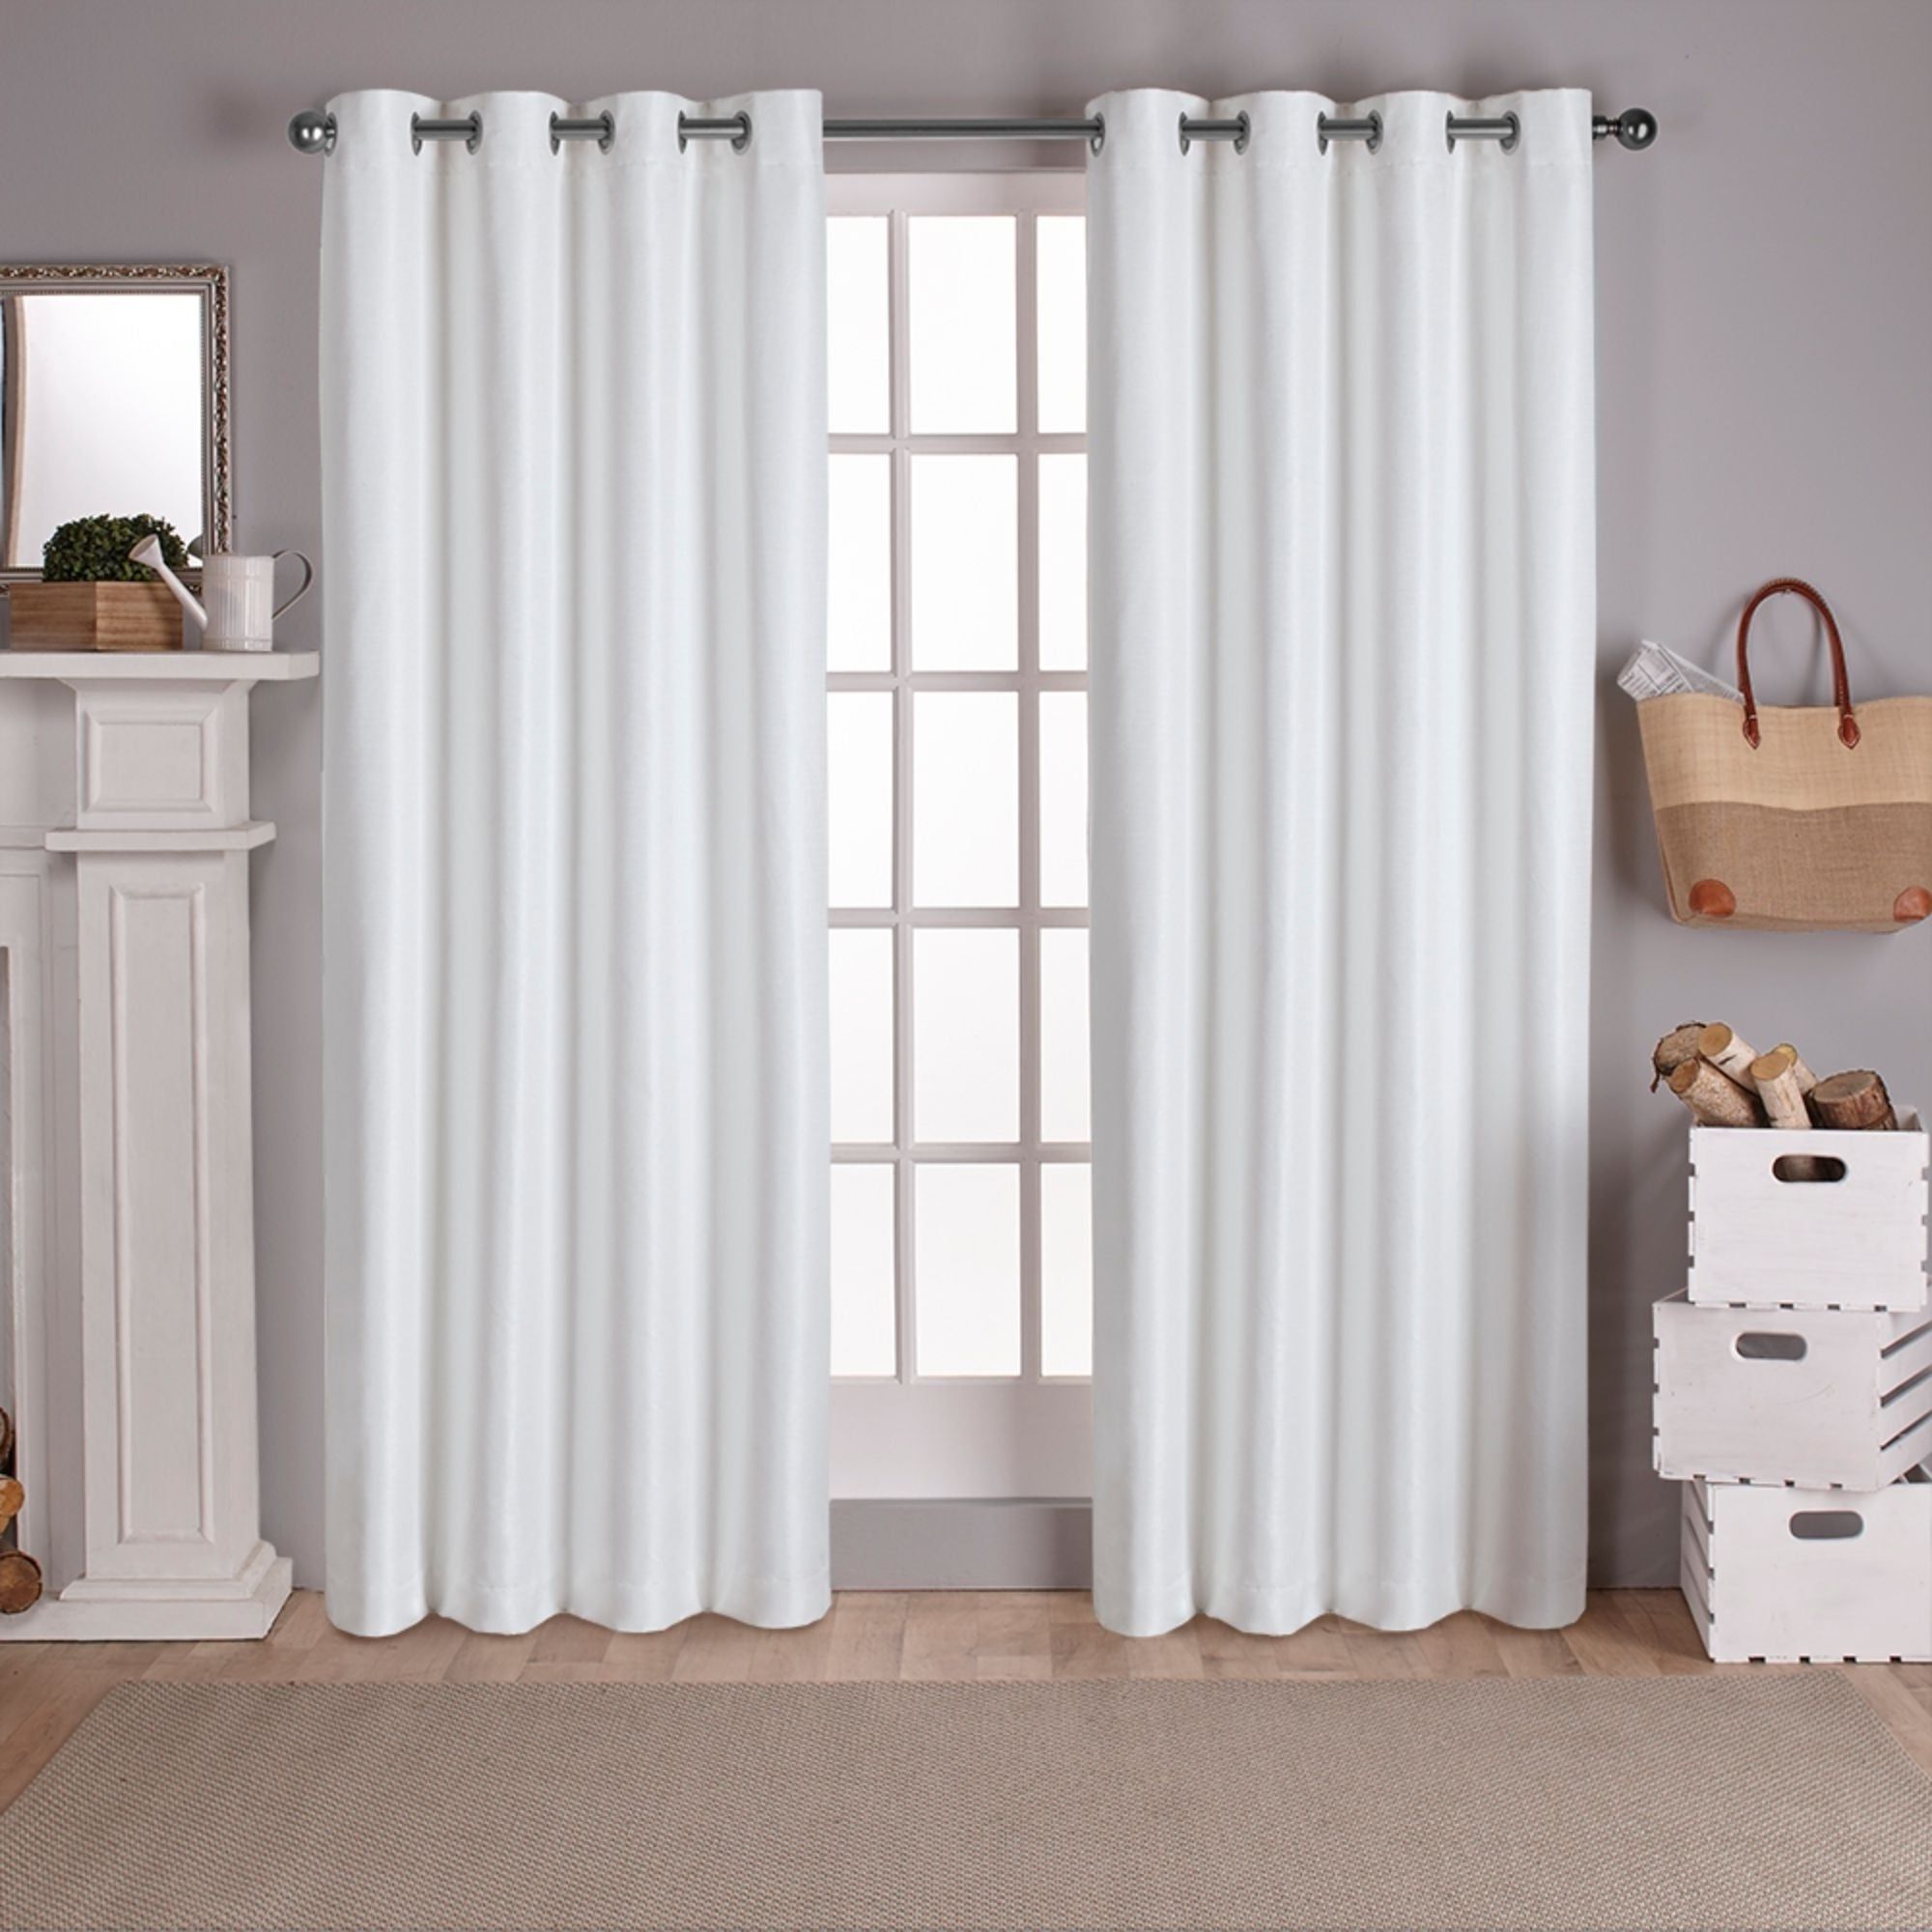 Most Recent Porch & Den Patchen Raw Silk Thermal Insulated Grommet Top Curtain Panel  Pair Within Raw Silk Thermal Insulated Grommet Top Curtain Panel Pairs (View 7 of 20)